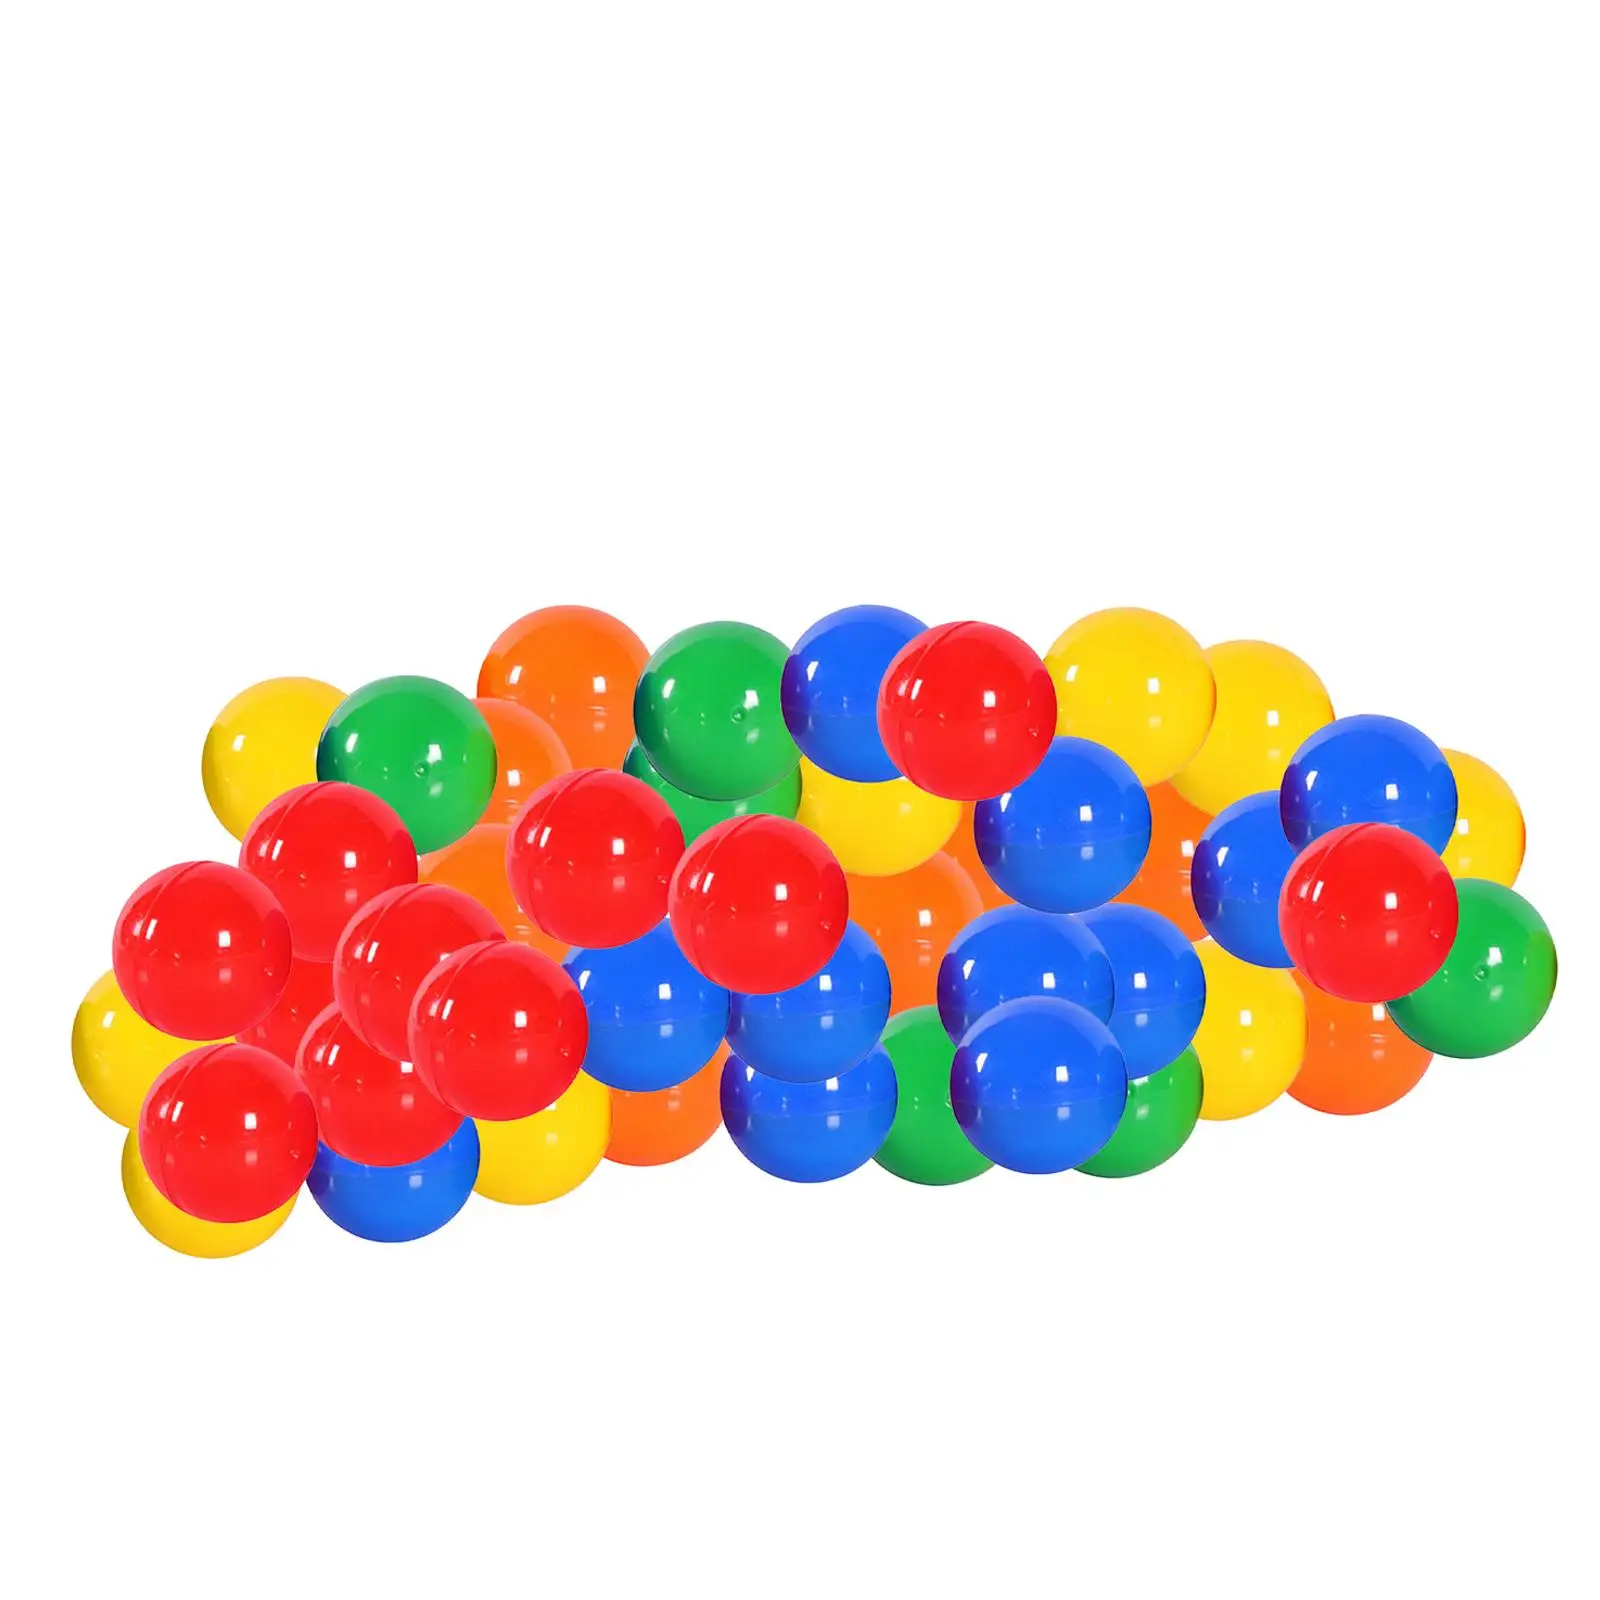 50 Pieces Bingo Ball Accessories Replacement Parts Raffle Balls Calling Balls for Company Nights Parties Household Family